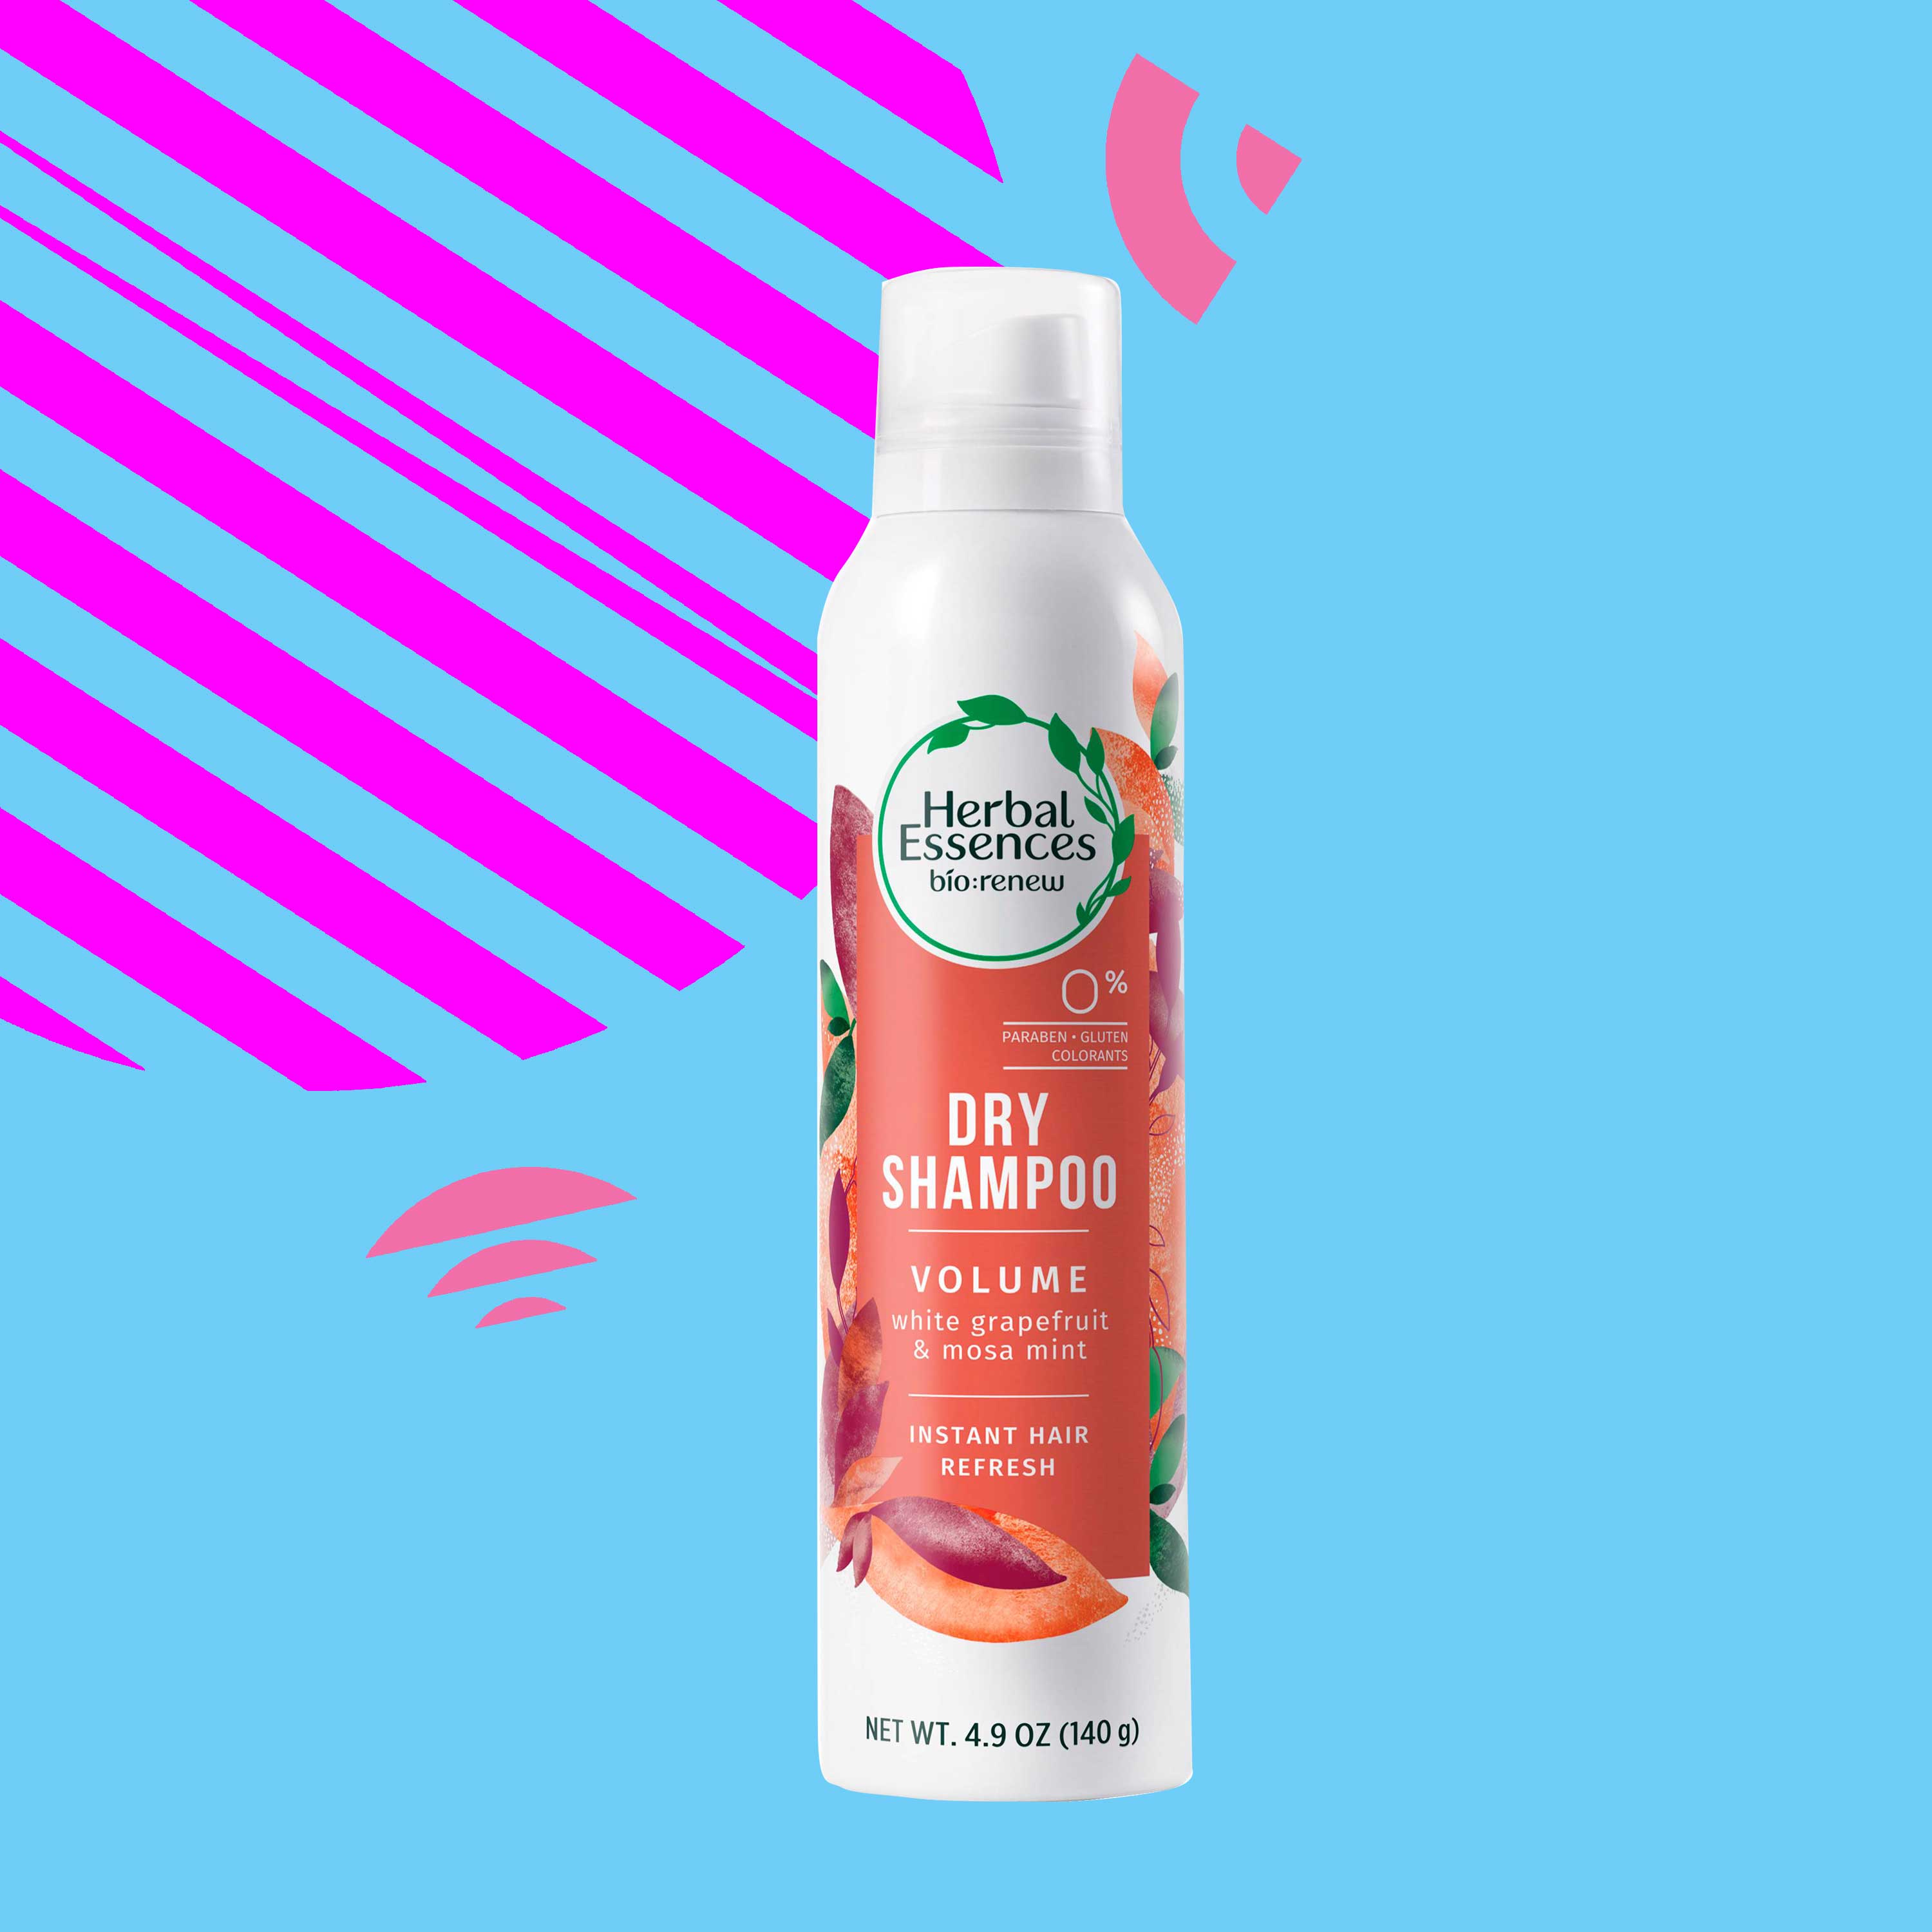 10 Grapefruit-Infused Beauty Finds to Pack Before Your Next Girl's Trip
